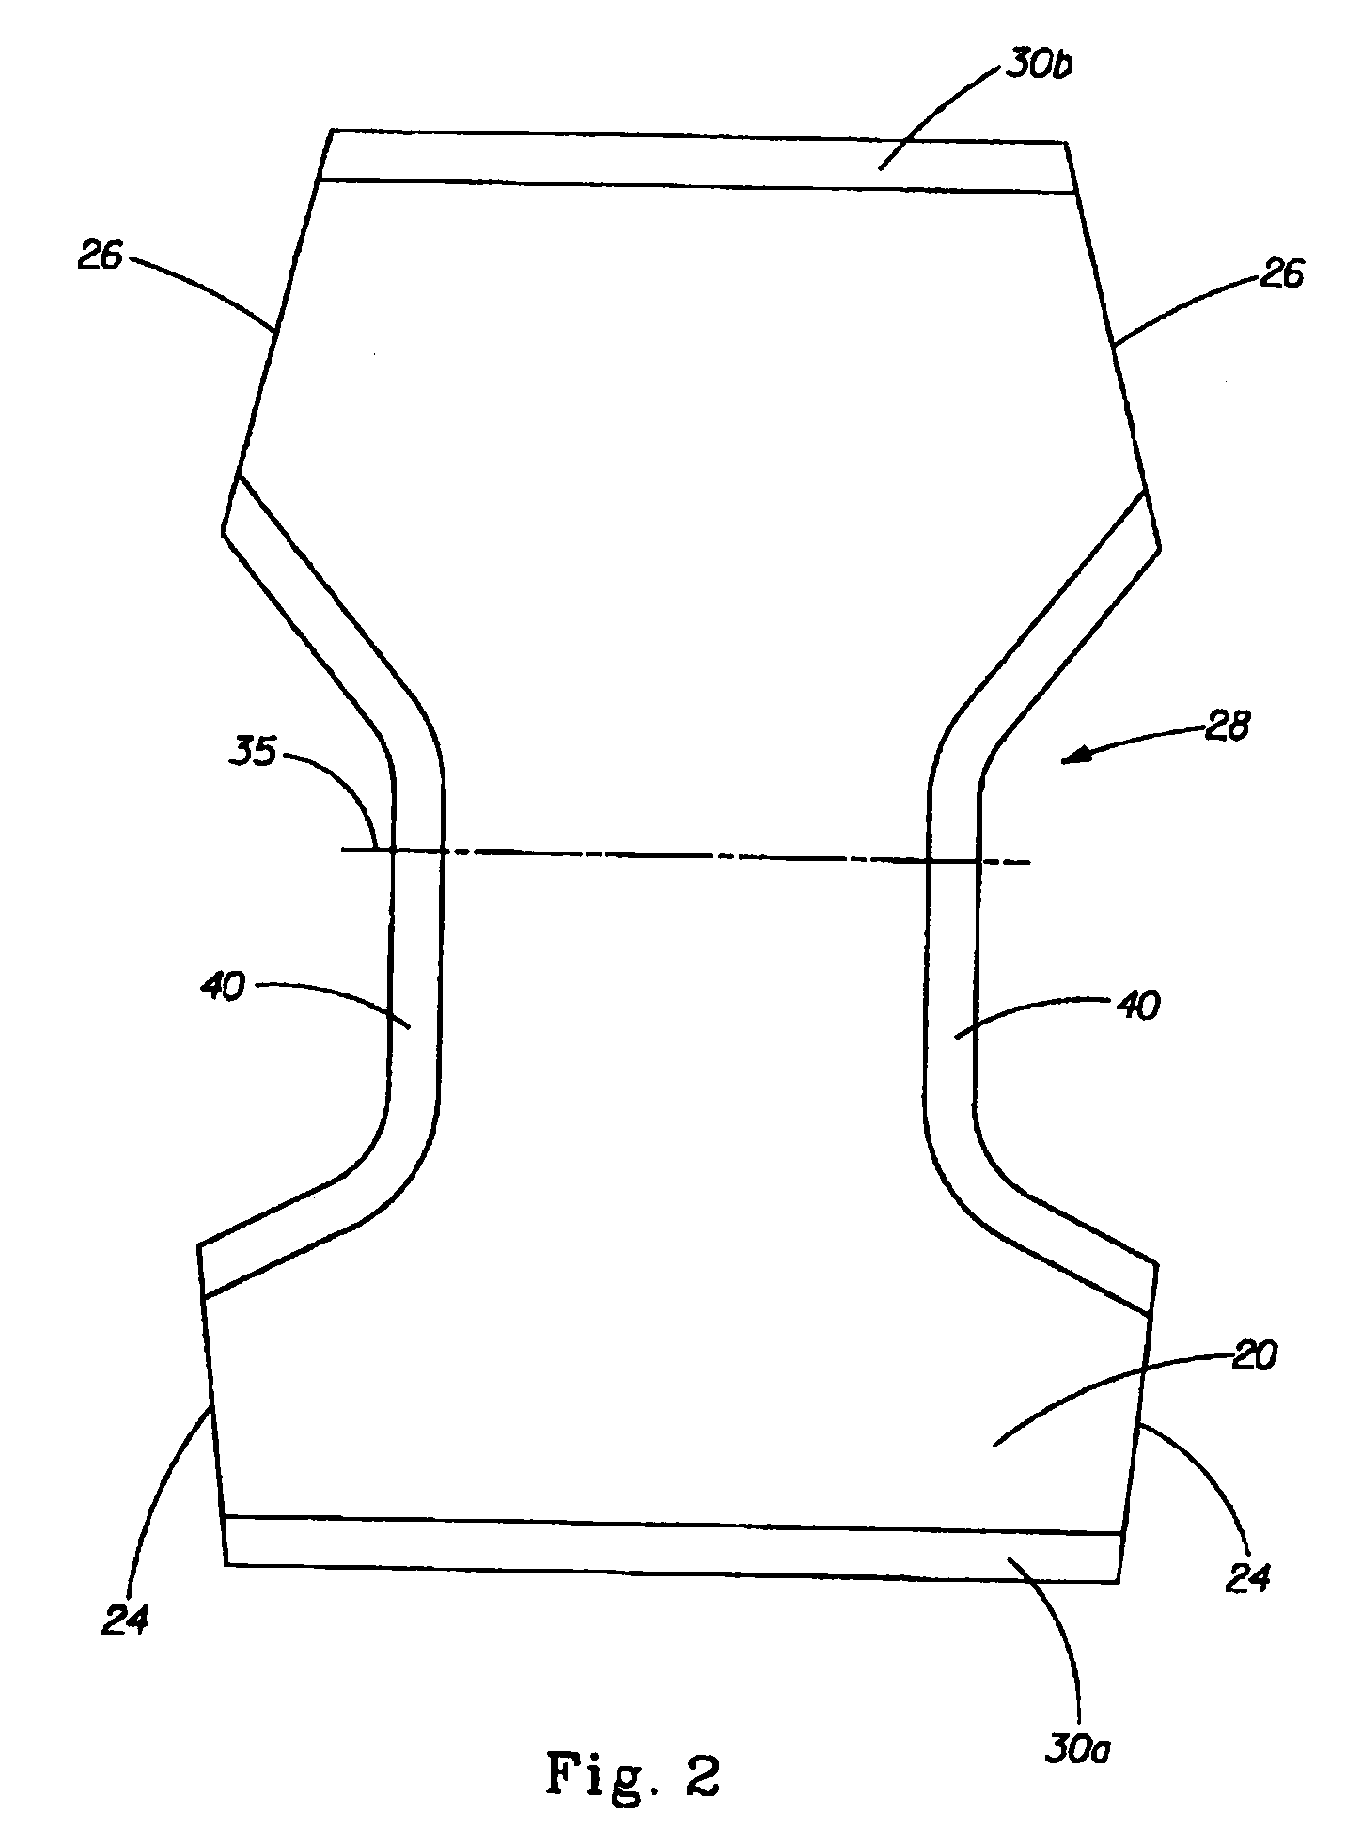 System and Method for High-Speed Continuous Application of a Strip Material to a Moving Sheet-Like Substrate Material at Laterally Shifting Locations